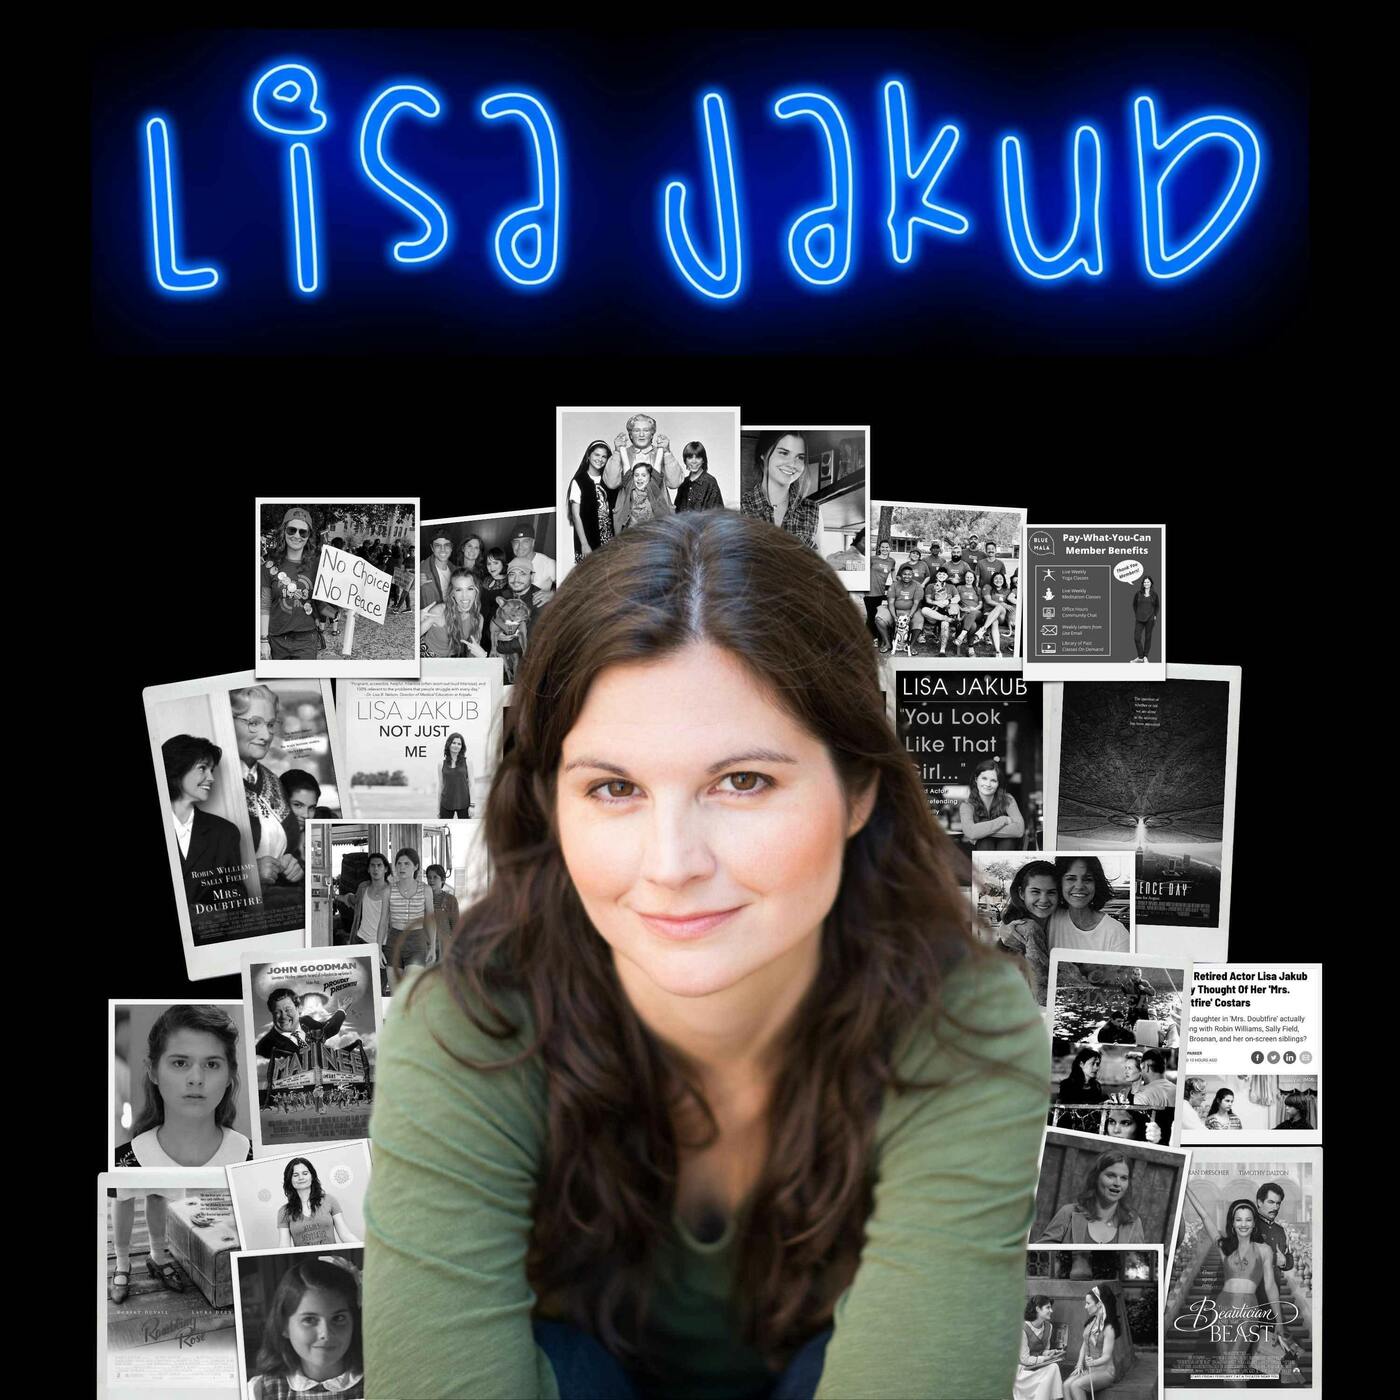 Vulnerable EP43: Former Child Actor Lisa Jakub on Why She Quit the Business